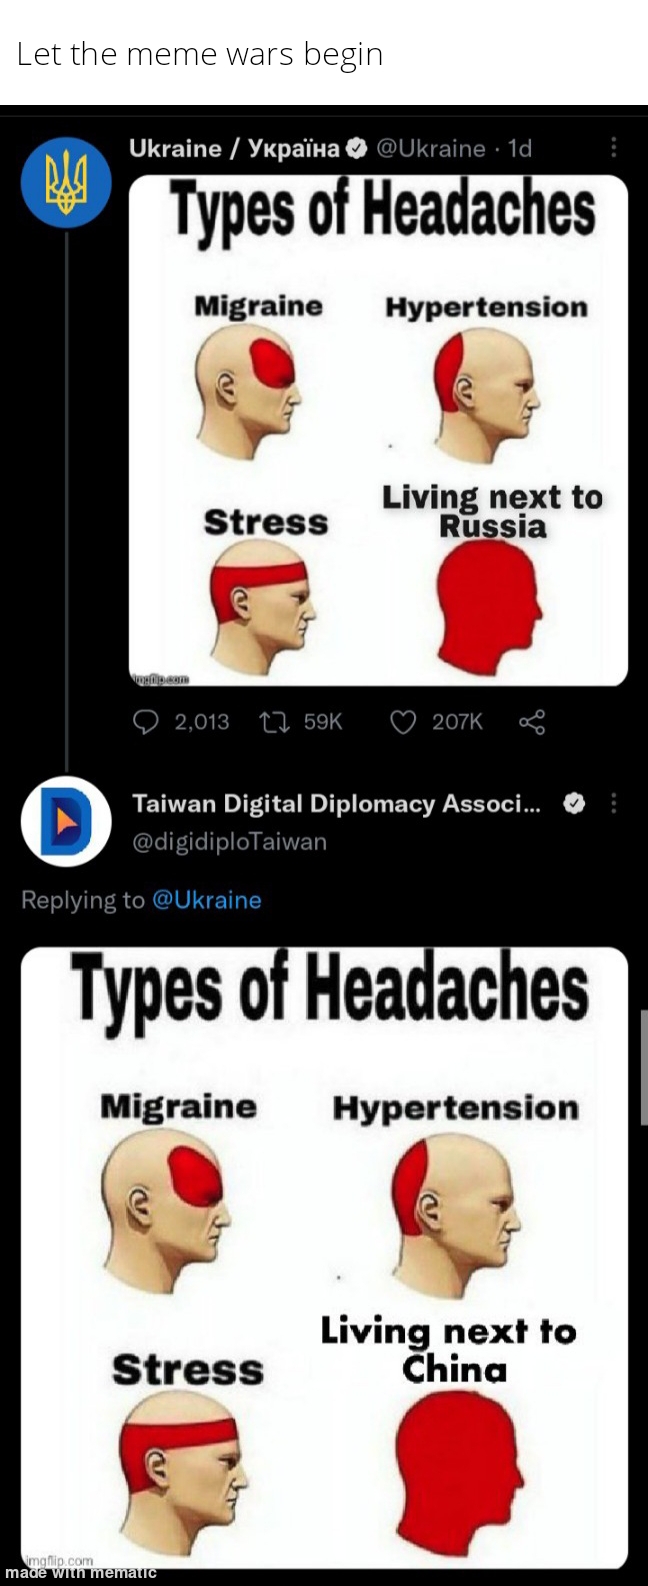 polish can be that hard - Let the meme wars begin Ukraine Ykpaha 1d Types of Headaches Migraine Hypertension Stress Living next to Russia p.com 2,013 D Taiwan Digital Diplomacy Associ... Types of Headaches Migraine Hypertension Living next to China Stress